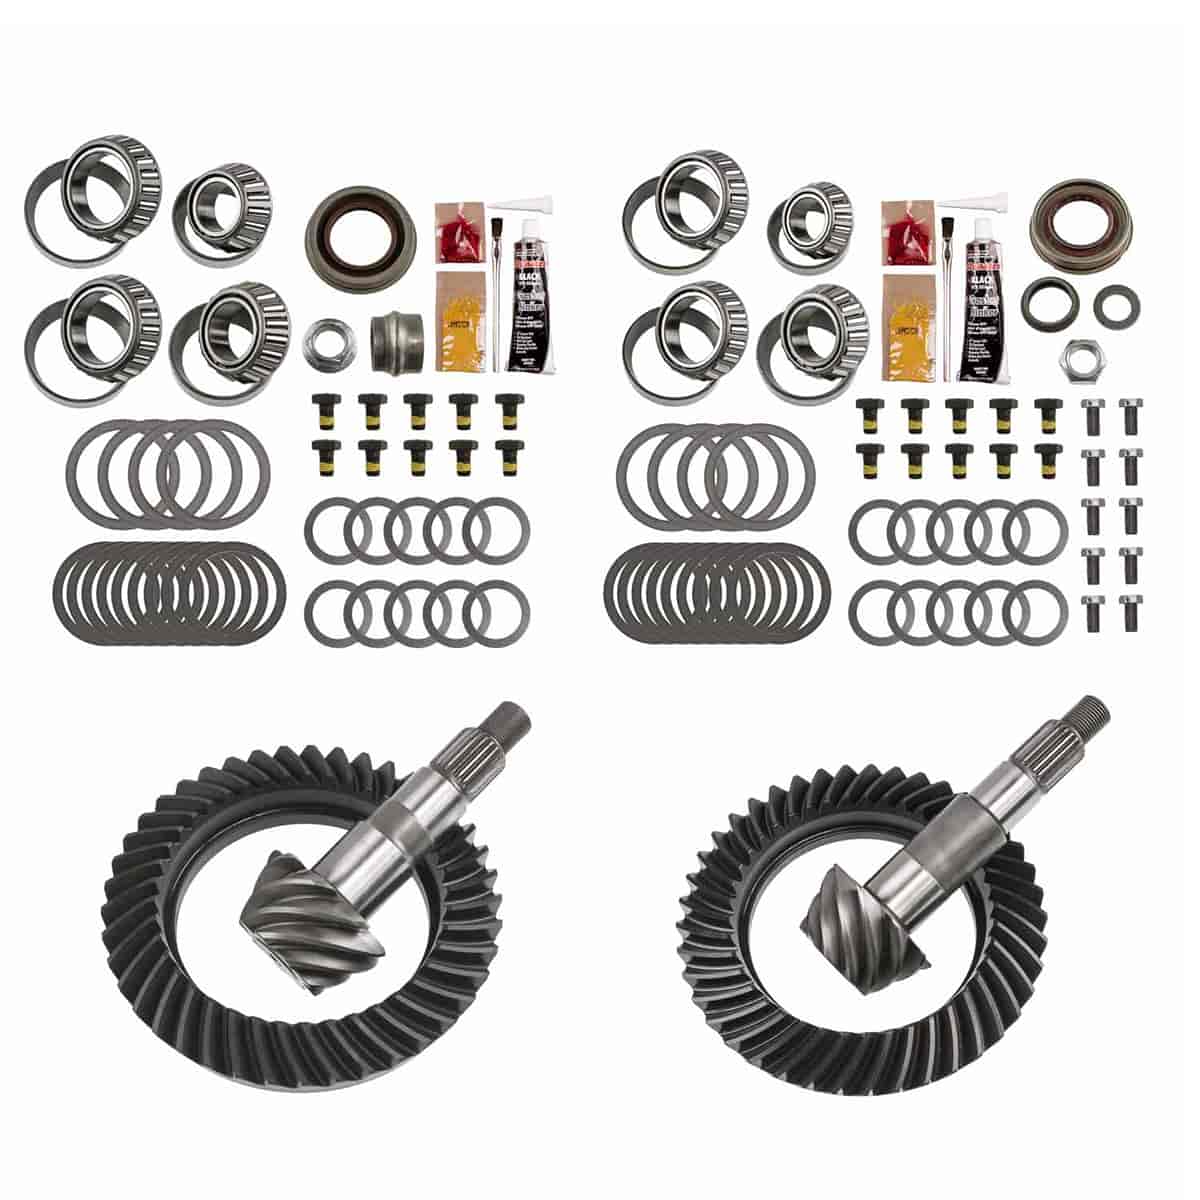 Complete Front and Rear Differential Ring & Pinion Kit 2007-2018 Jeep Wrangler JK Rubicon [Dana 44 JK, 4.56 Ratio]